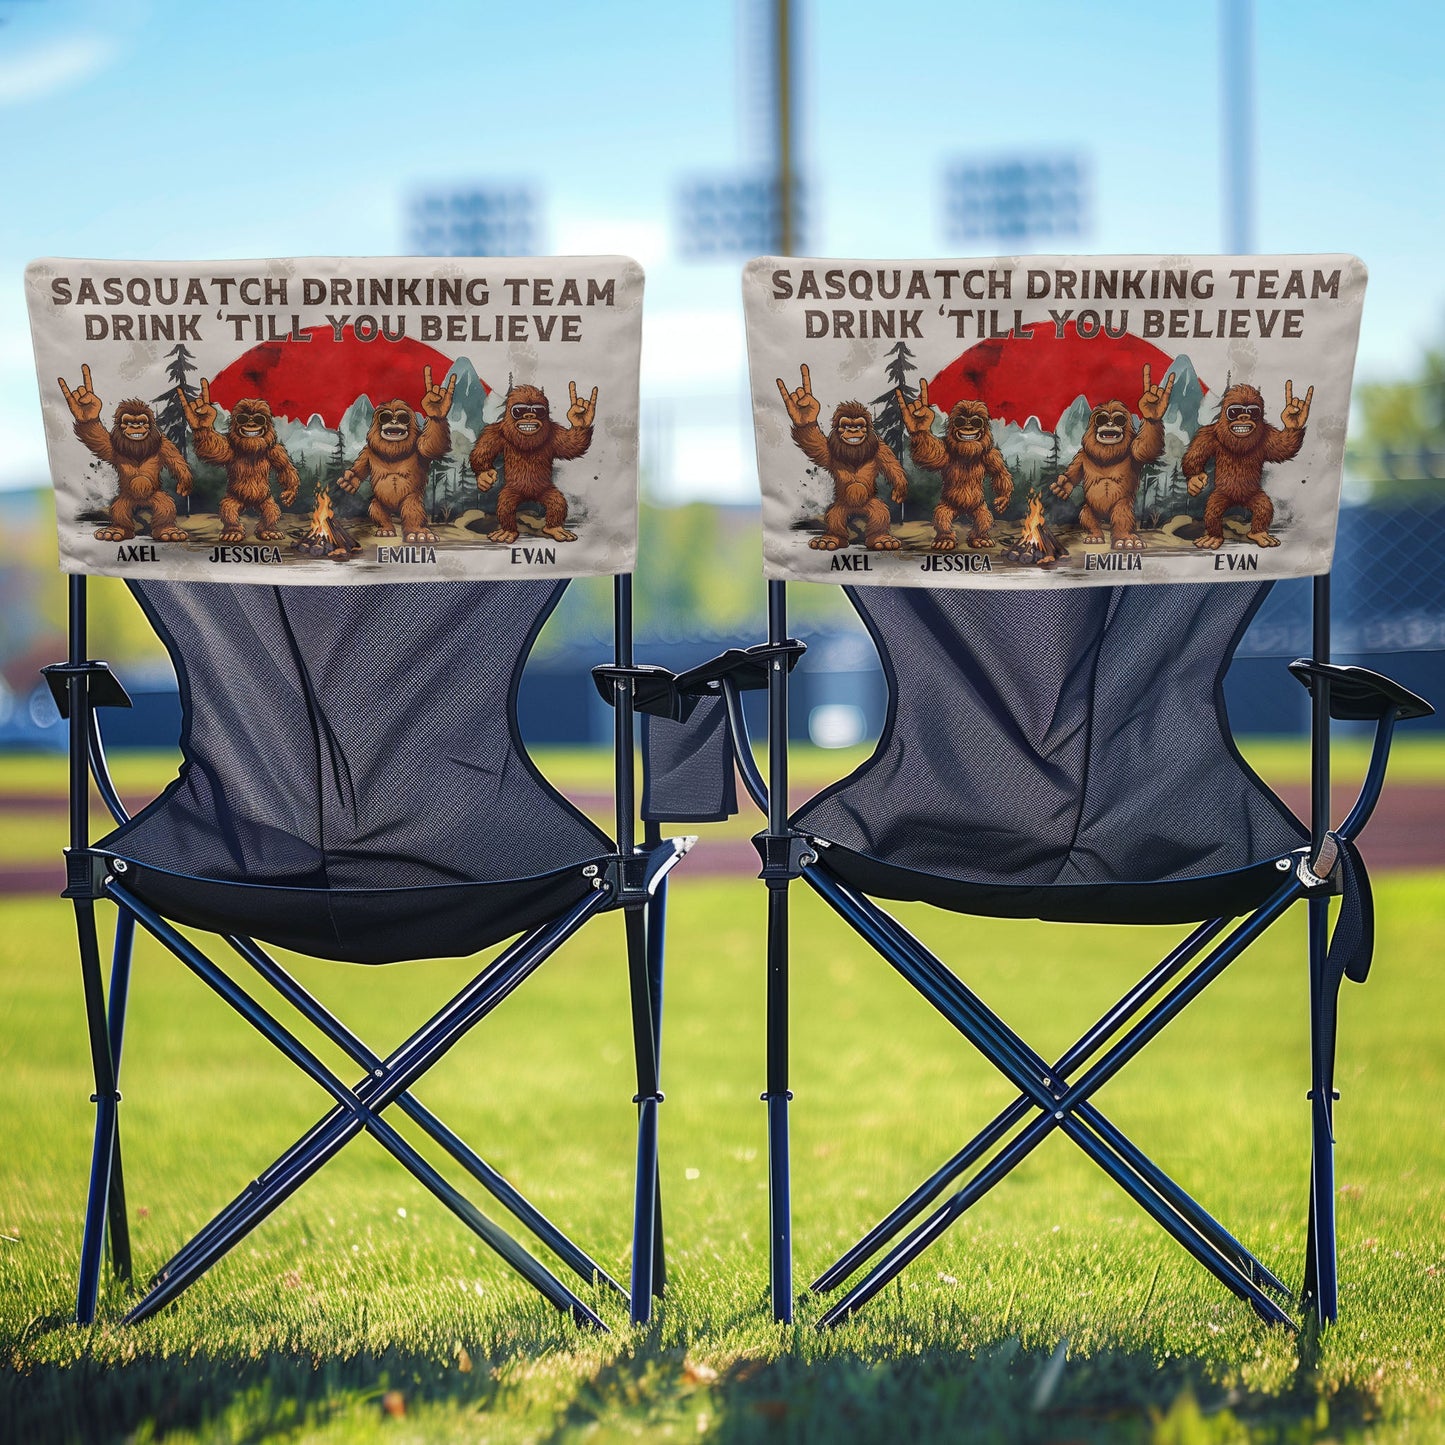 Sasquatch Drinking Team Drink Till You Believe - Personalized Folding Chair Cover